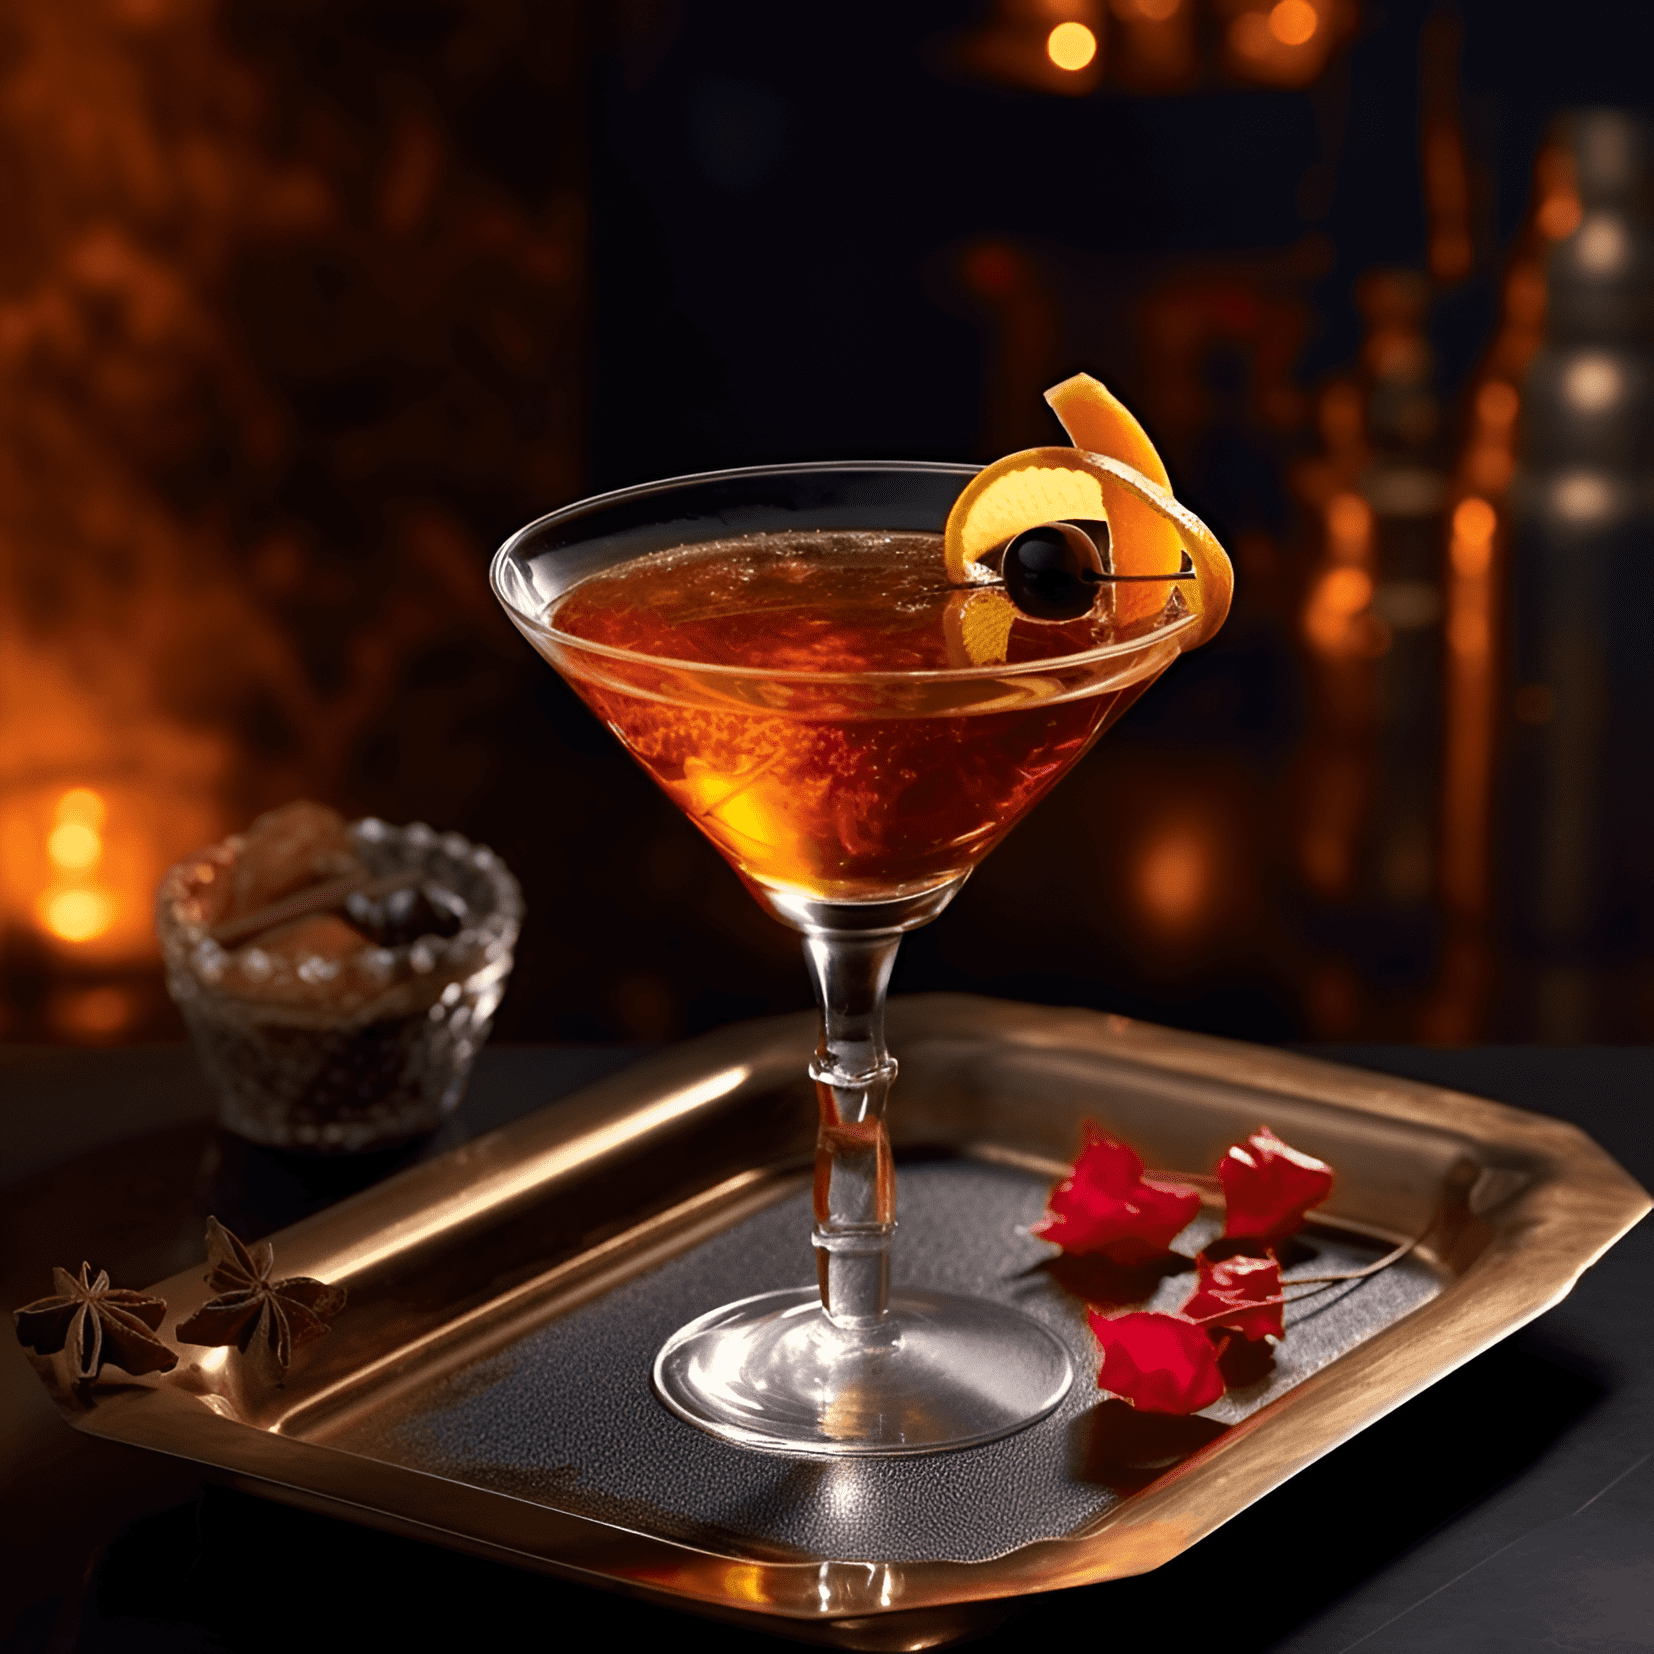 Oriental Cocktail Recipe - The Oriental cocktail offers a harmonious balance of sweet, spicy, and fruity flavors. The rye whiskey provides a strong, robust base, while the sweet vermouth adds a touch of sweetness and complexity. The cherry liqueur imparts a subtle fruitiness, and the orange bitters add a hint of citrus and spice.